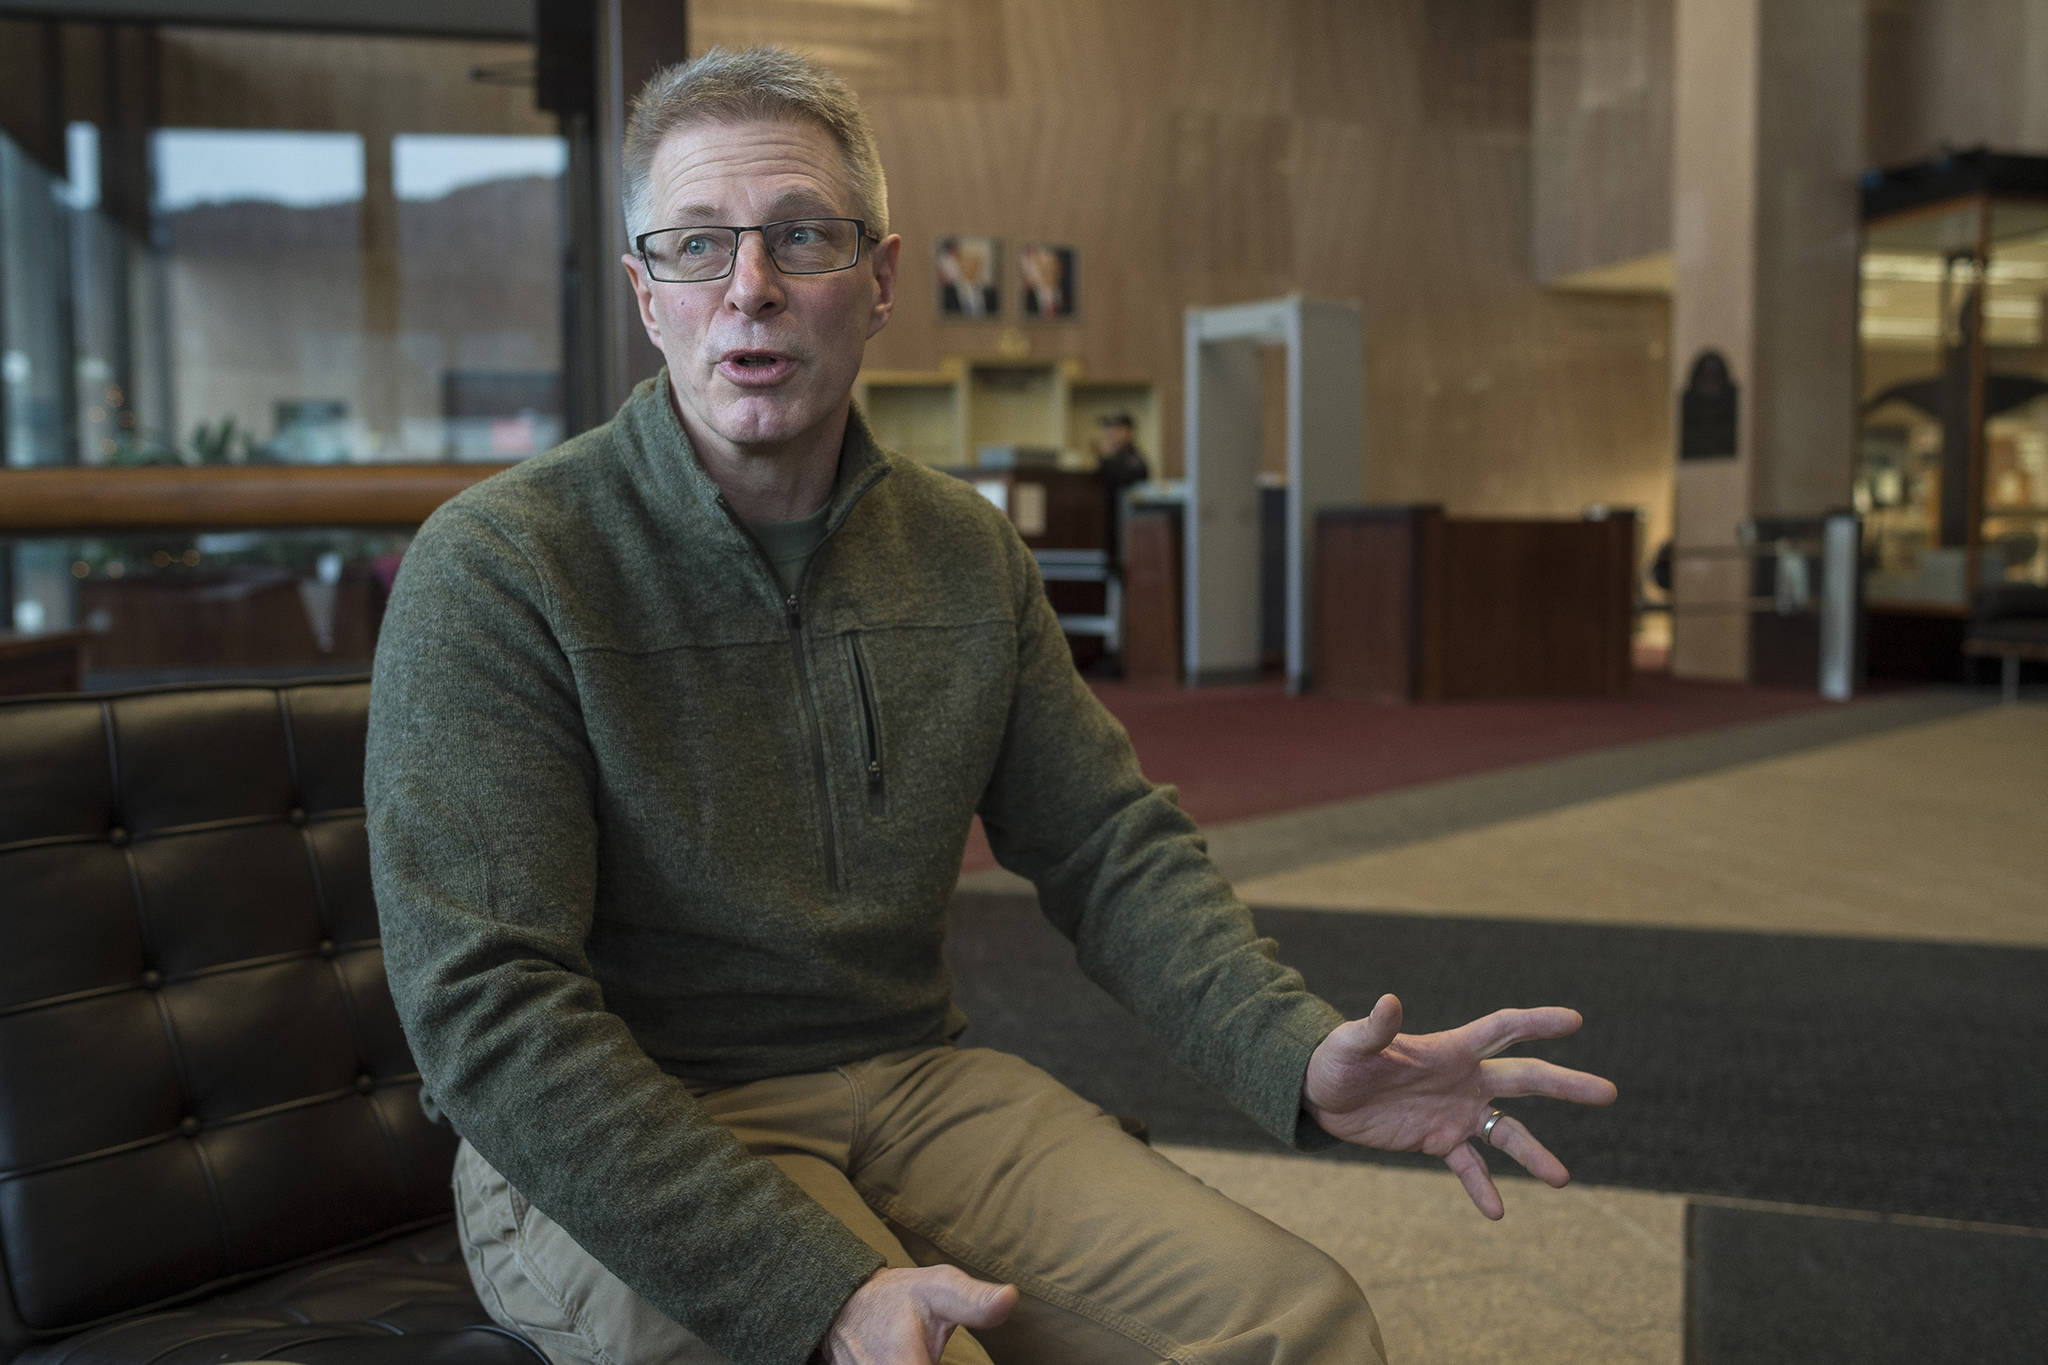 Joe McCabe, a paralegal specialist with the NOAA General Counsel office, talks Wednesday, Jan. 9, 2019, about being being off work since the partial federal shutdown started on Saturday, Dec. 22, 2018. McCabe, 55, said he has always had work since he was 13. (Michael Penn | Juneau Empire)